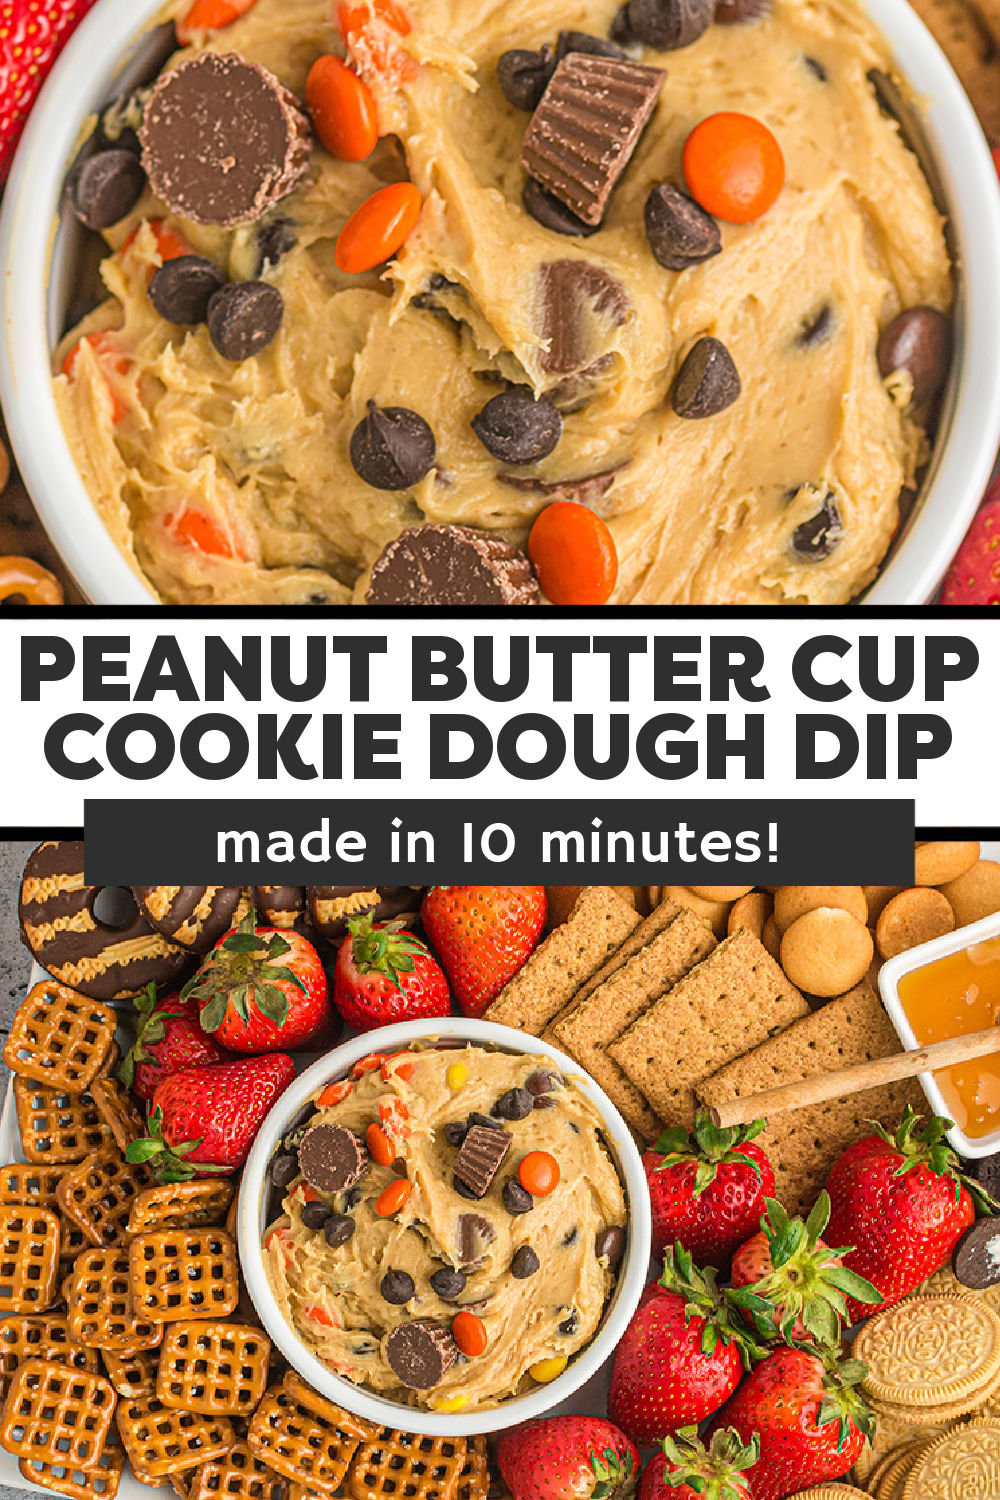 Peanut Butter Cookie Dough Dip is so simple to make and perfect for the peanut butter and chocolate lover. This creamy and fluffy dessert dip is loaded with mini Reese’s cups, Reese’s Pieces, and just the right amount of chocolate chips. | www.persnicketyplates.com